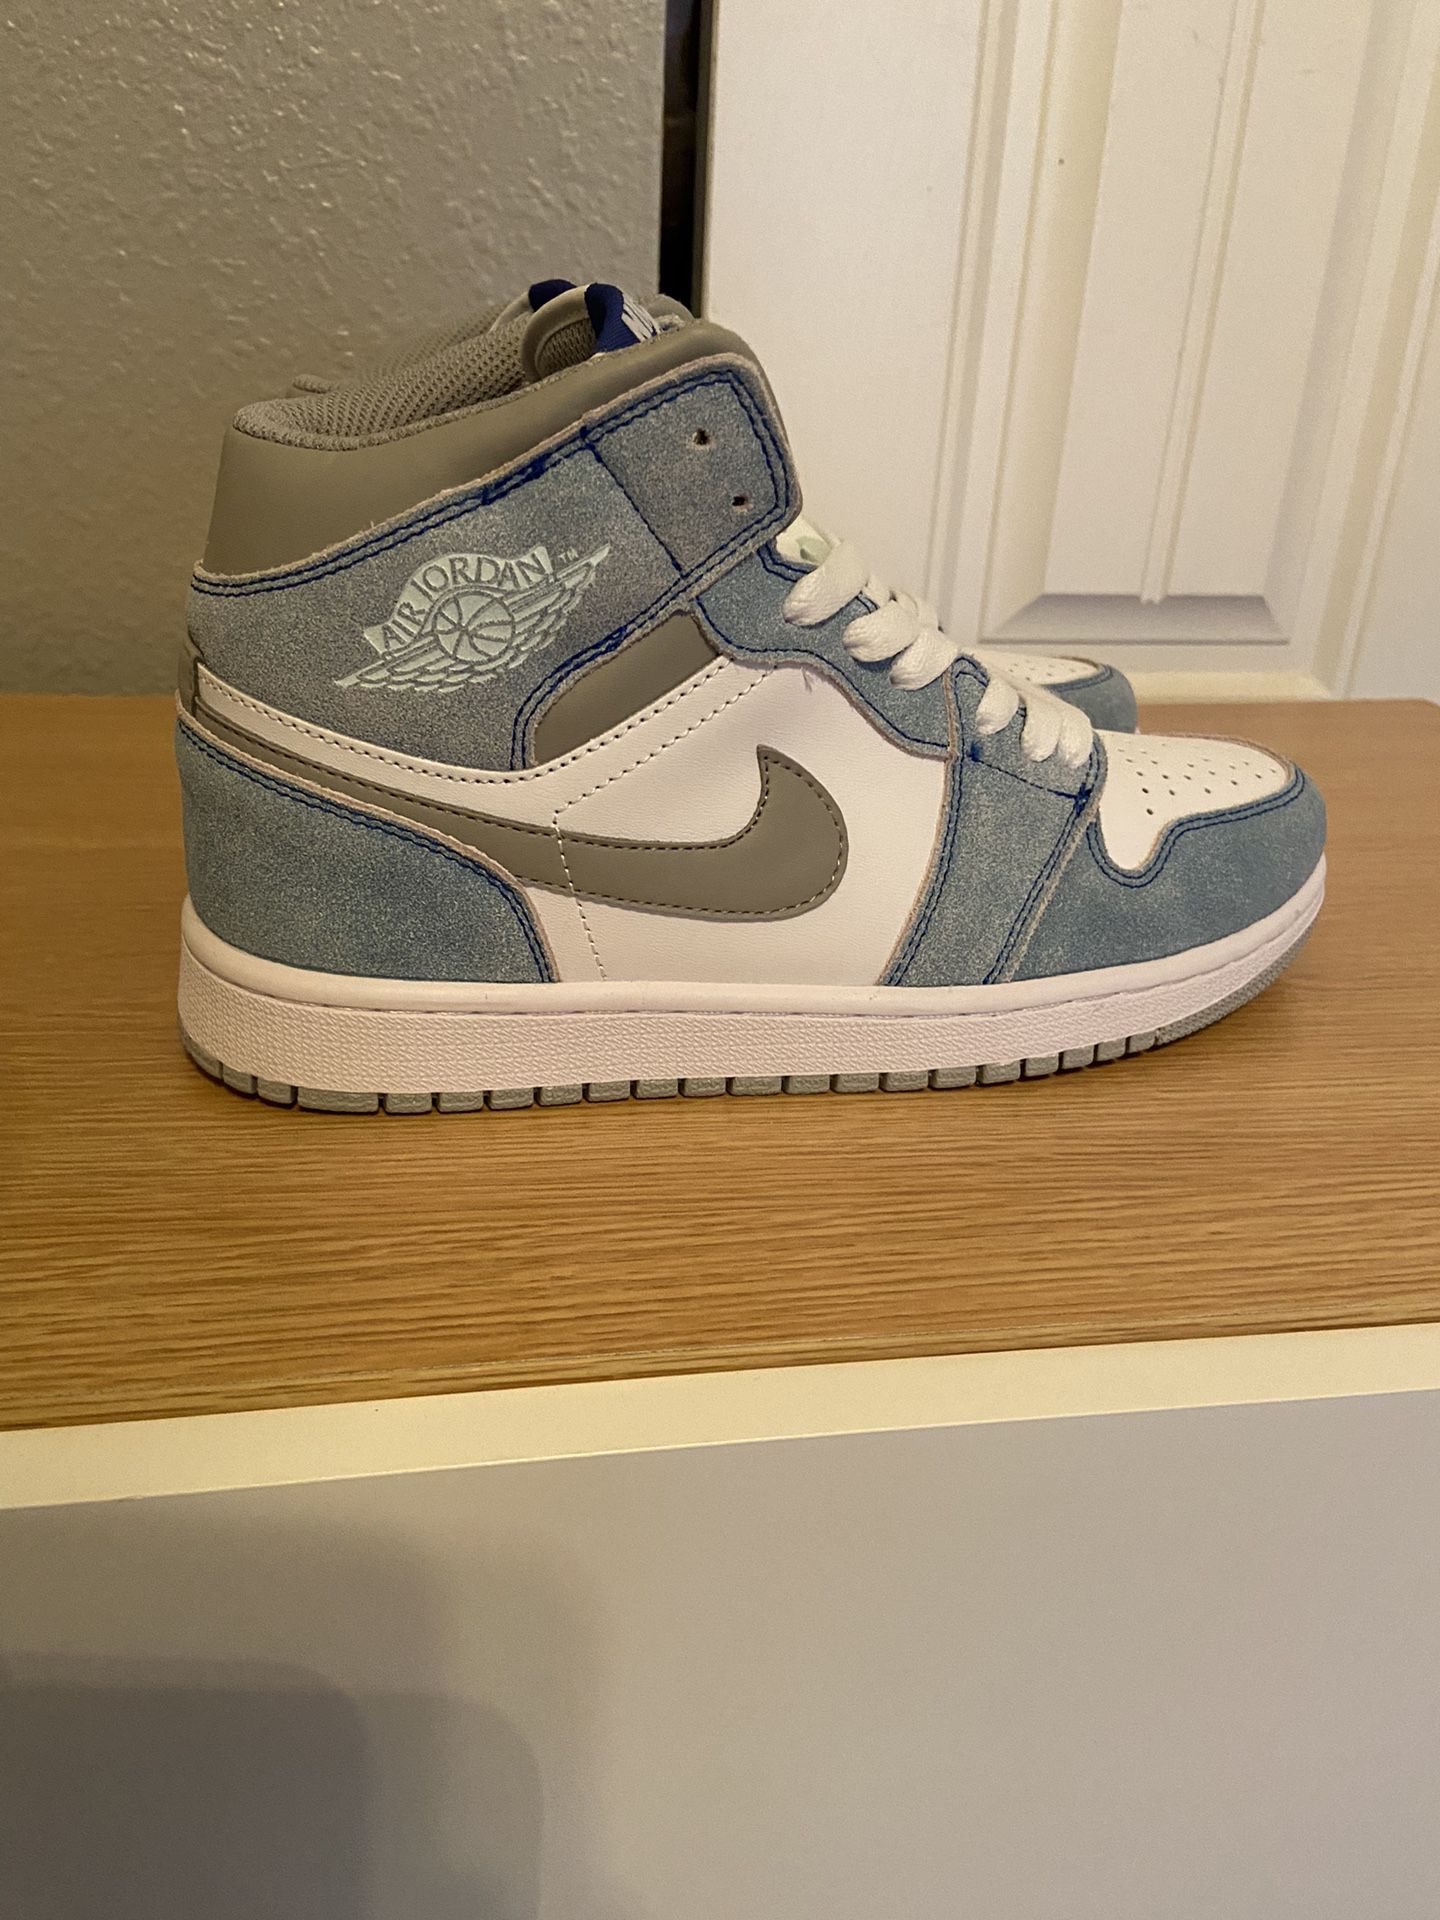 Nike Air Men’s Size 8 (New)